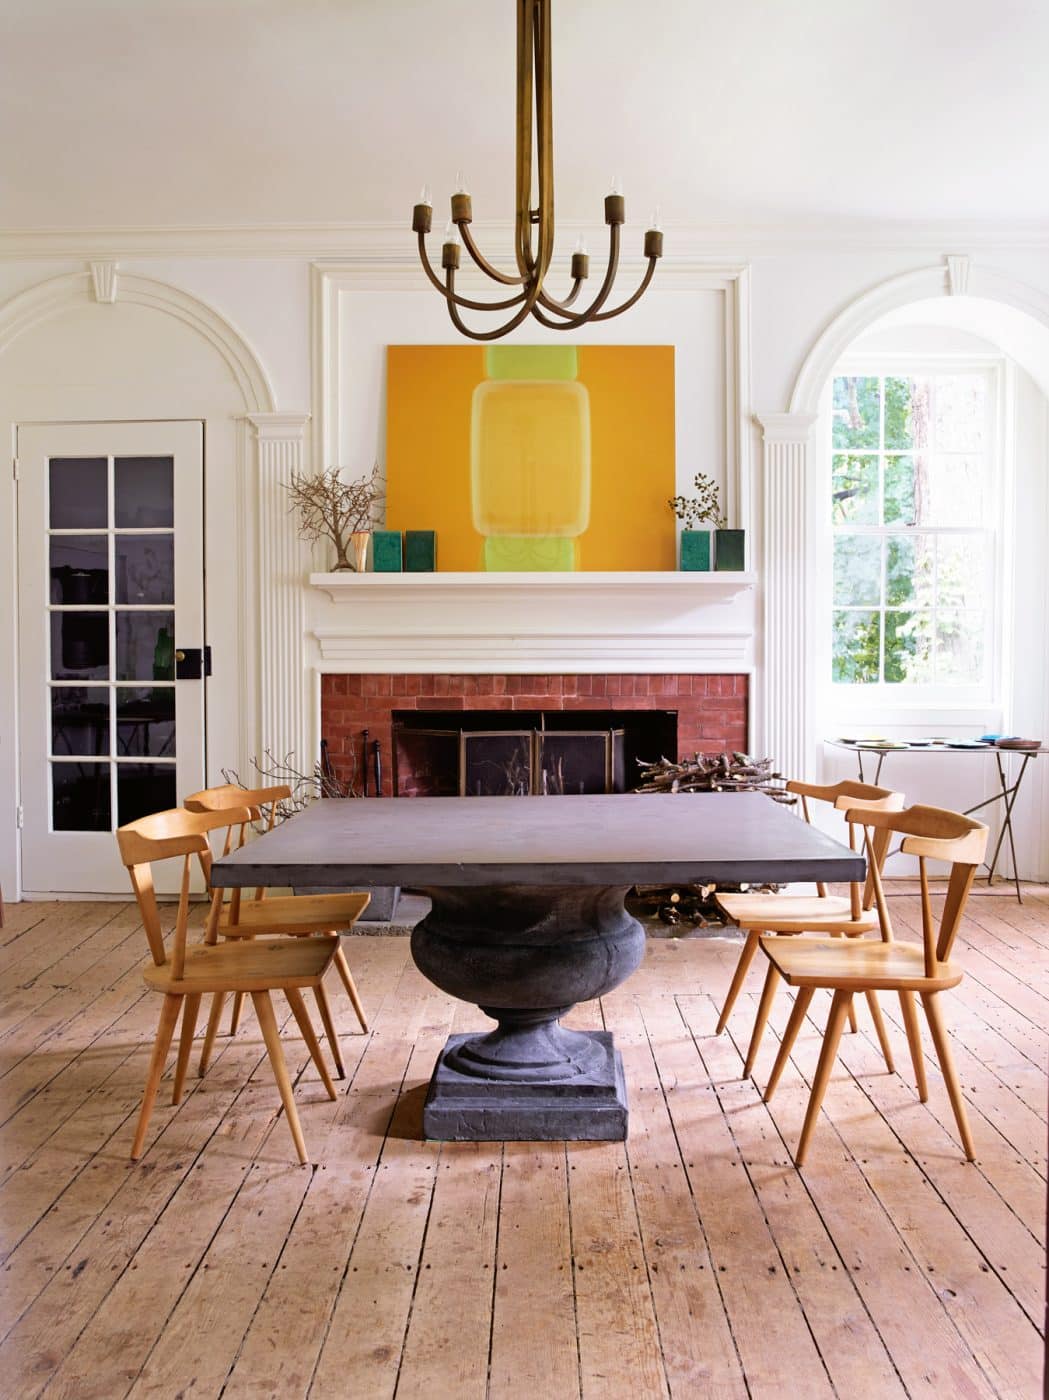 In the dining room of the Upstate New York home of architect David Mann and his partner, Fritz Karch, Paul McCobb chairs surround a classical-influenced cast-concrete and resin table; a photograph of Tupperware by Richard Caldicott hangs over the fireplace.